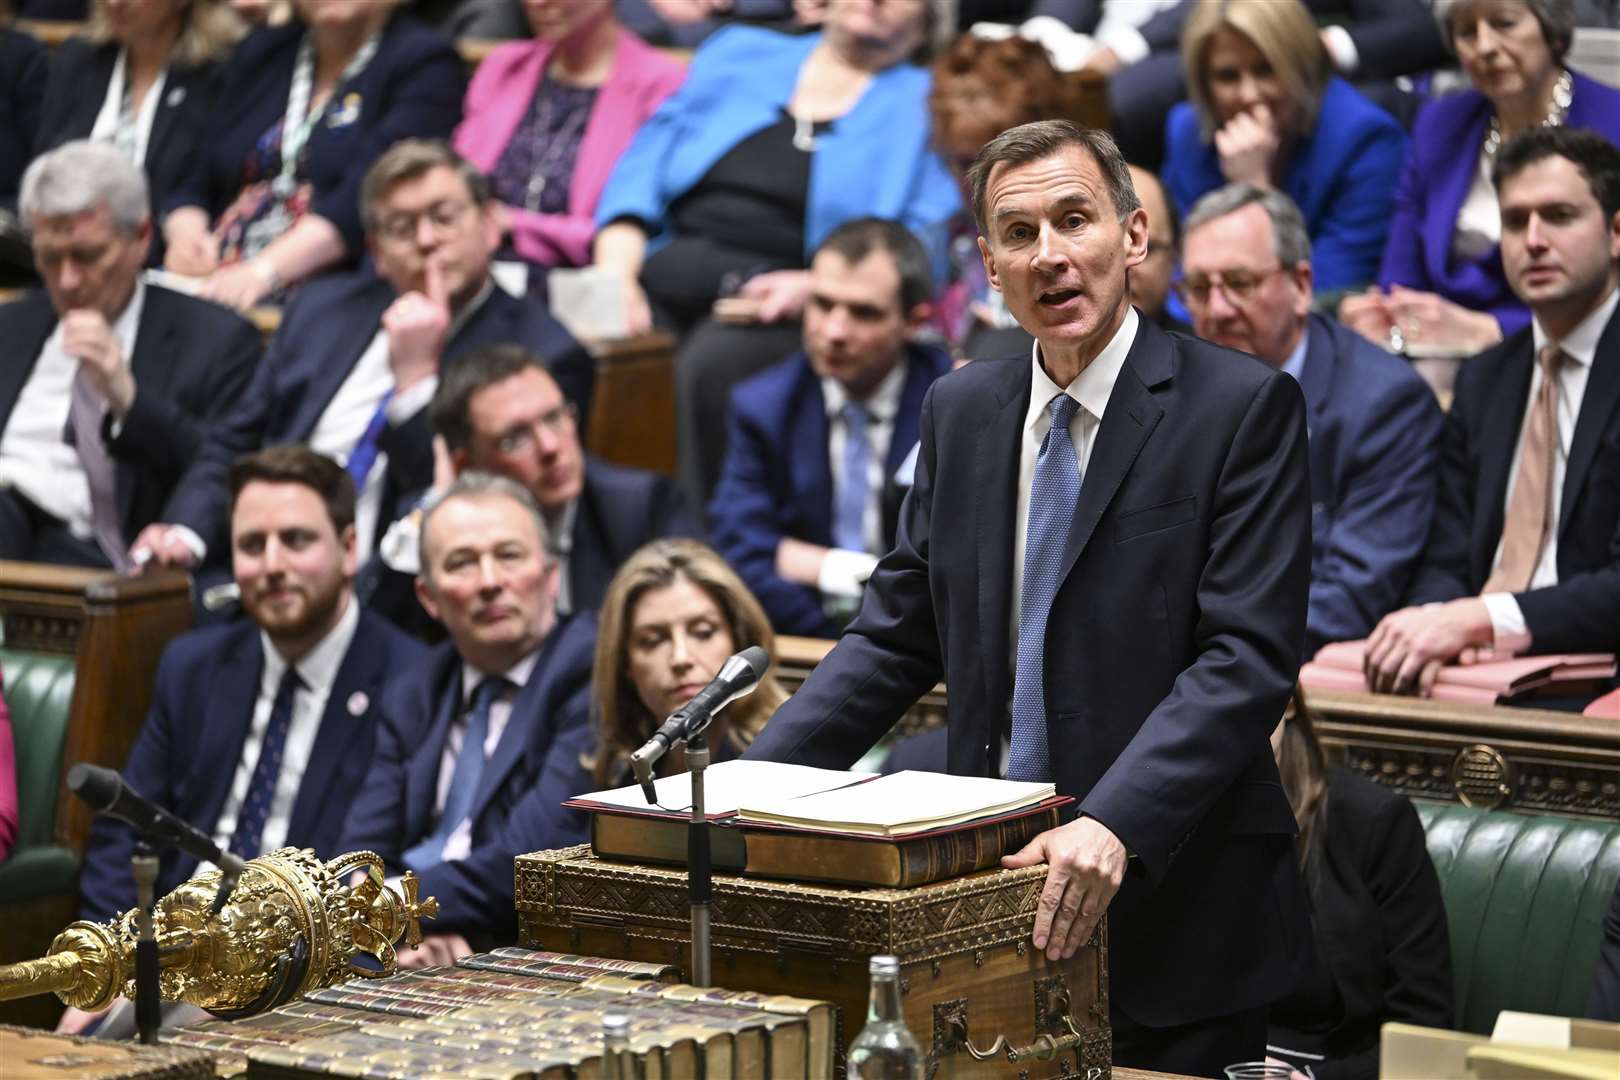 Chancellor of the Exchequer Jeremy Hunt delivered his Budget in the House of Commons (Andy Bailey/UK Parliament/PA)